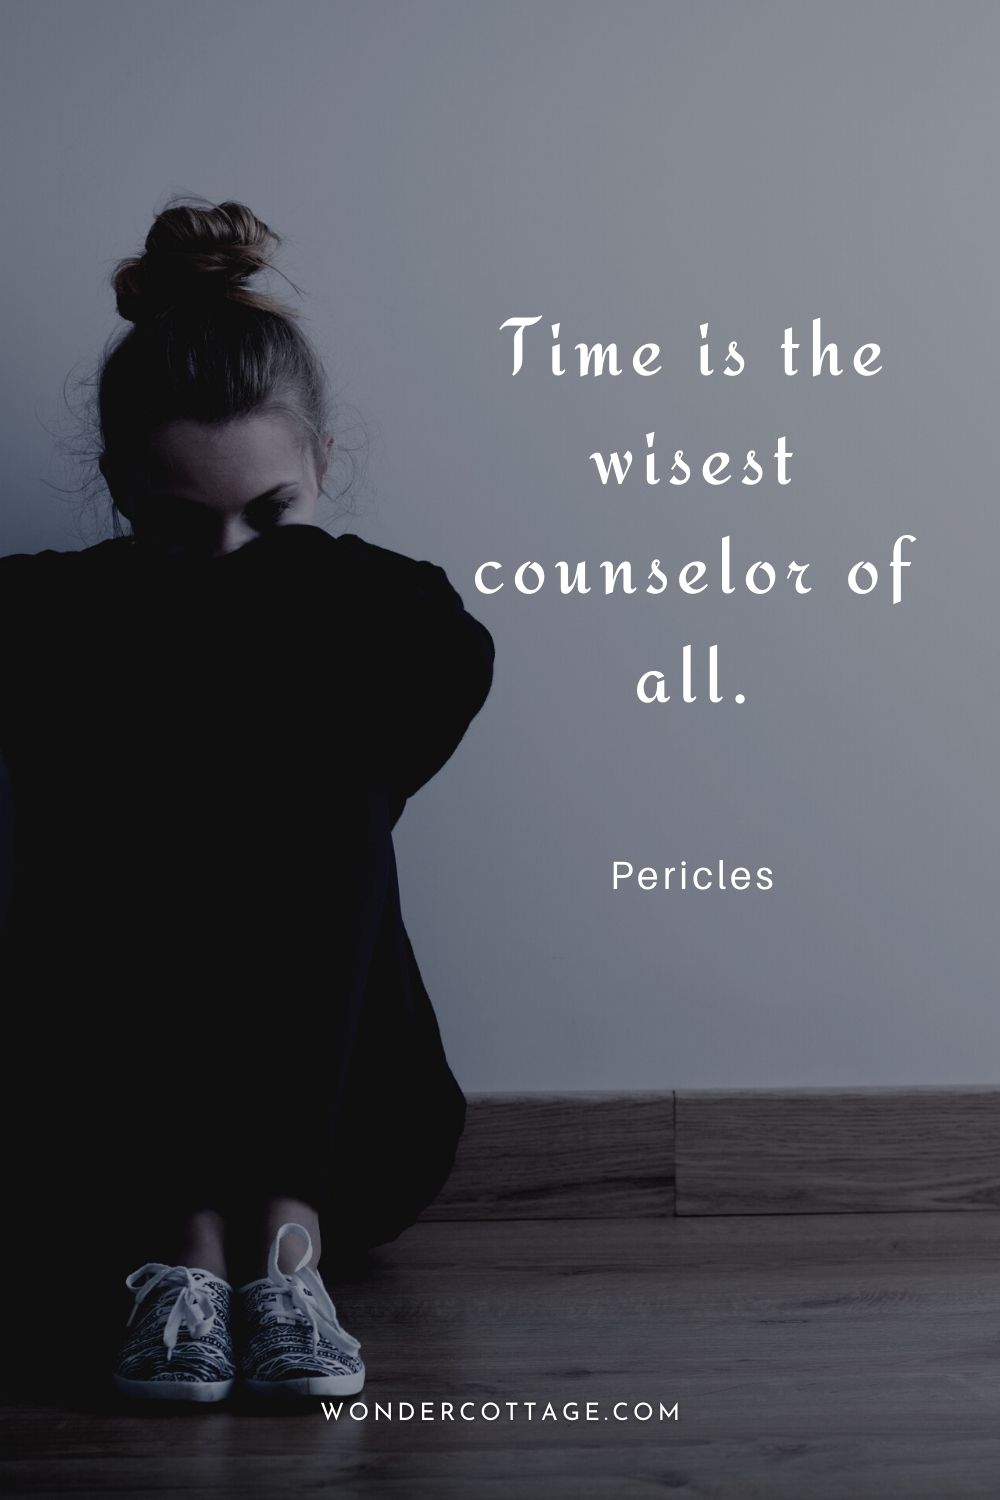 Time is the wisest counselor of all.  Pericles